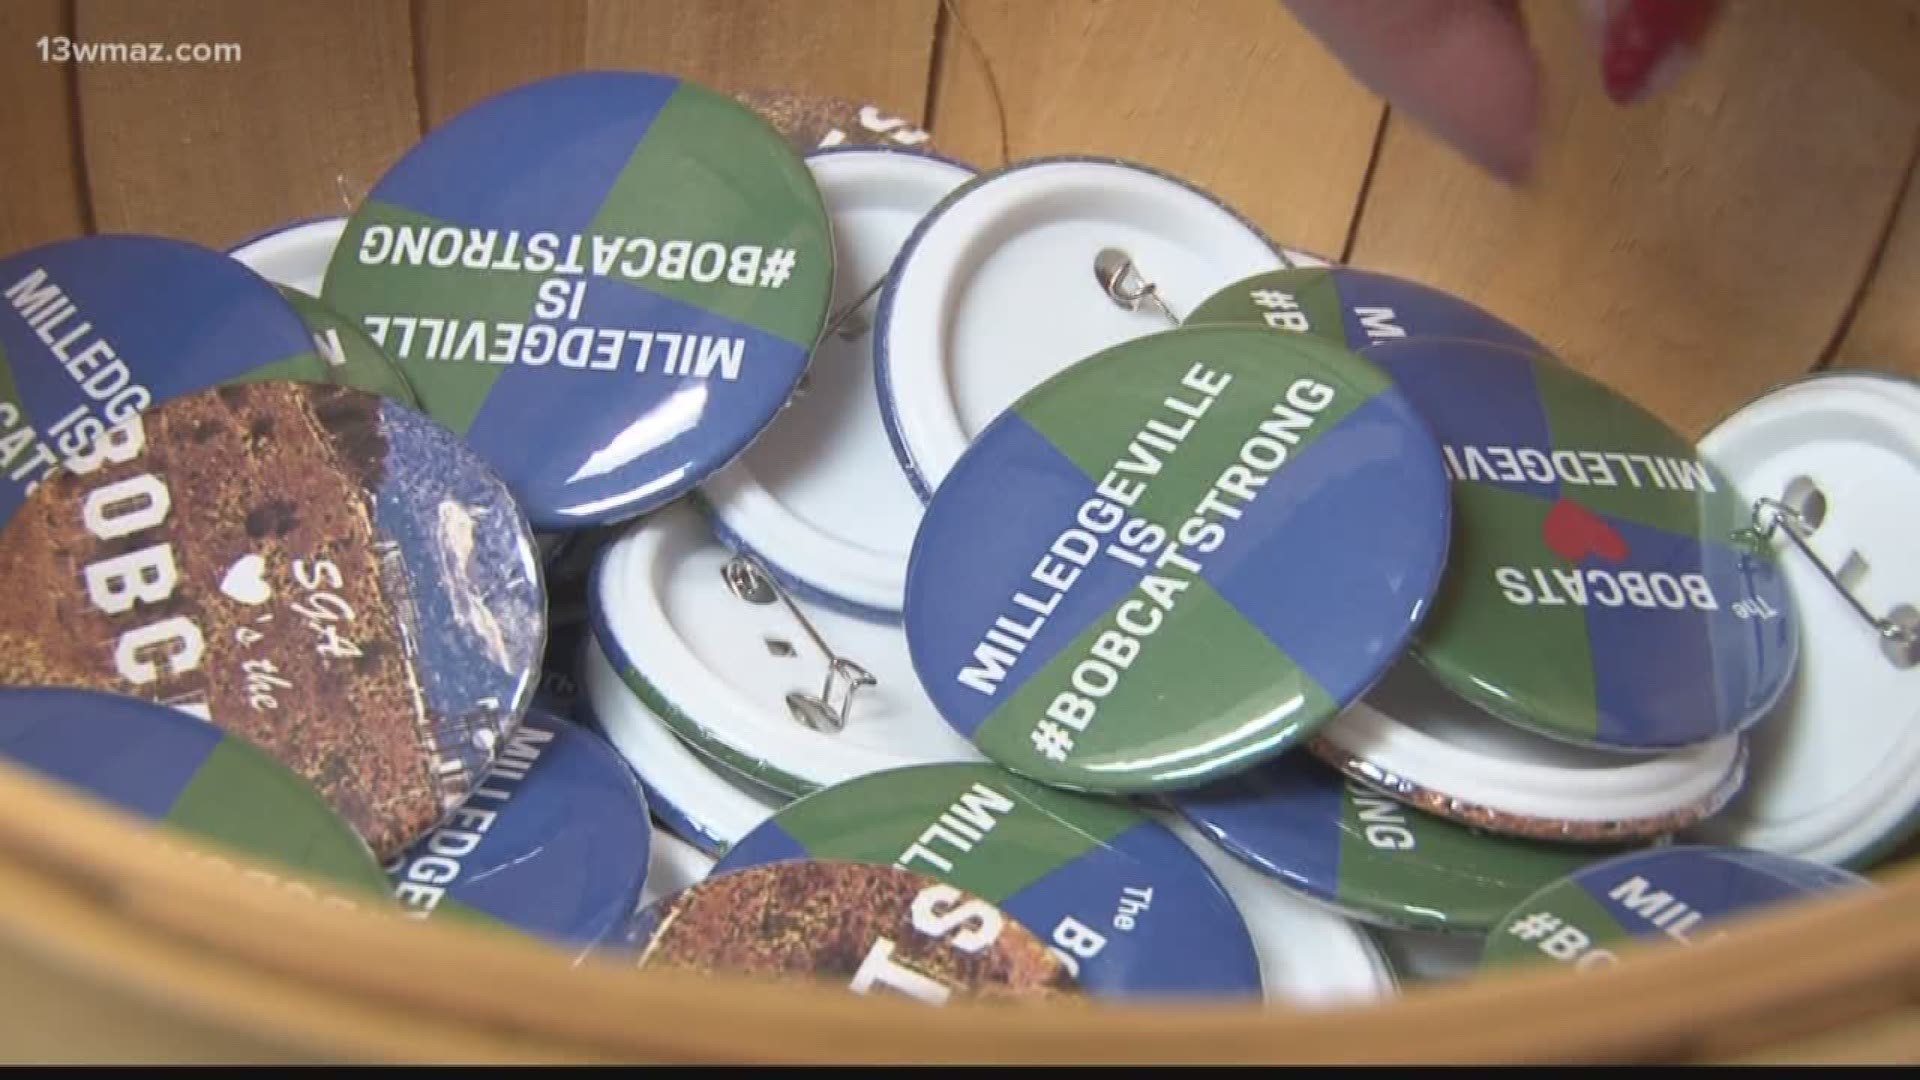 GCSU buttons give back to first responders